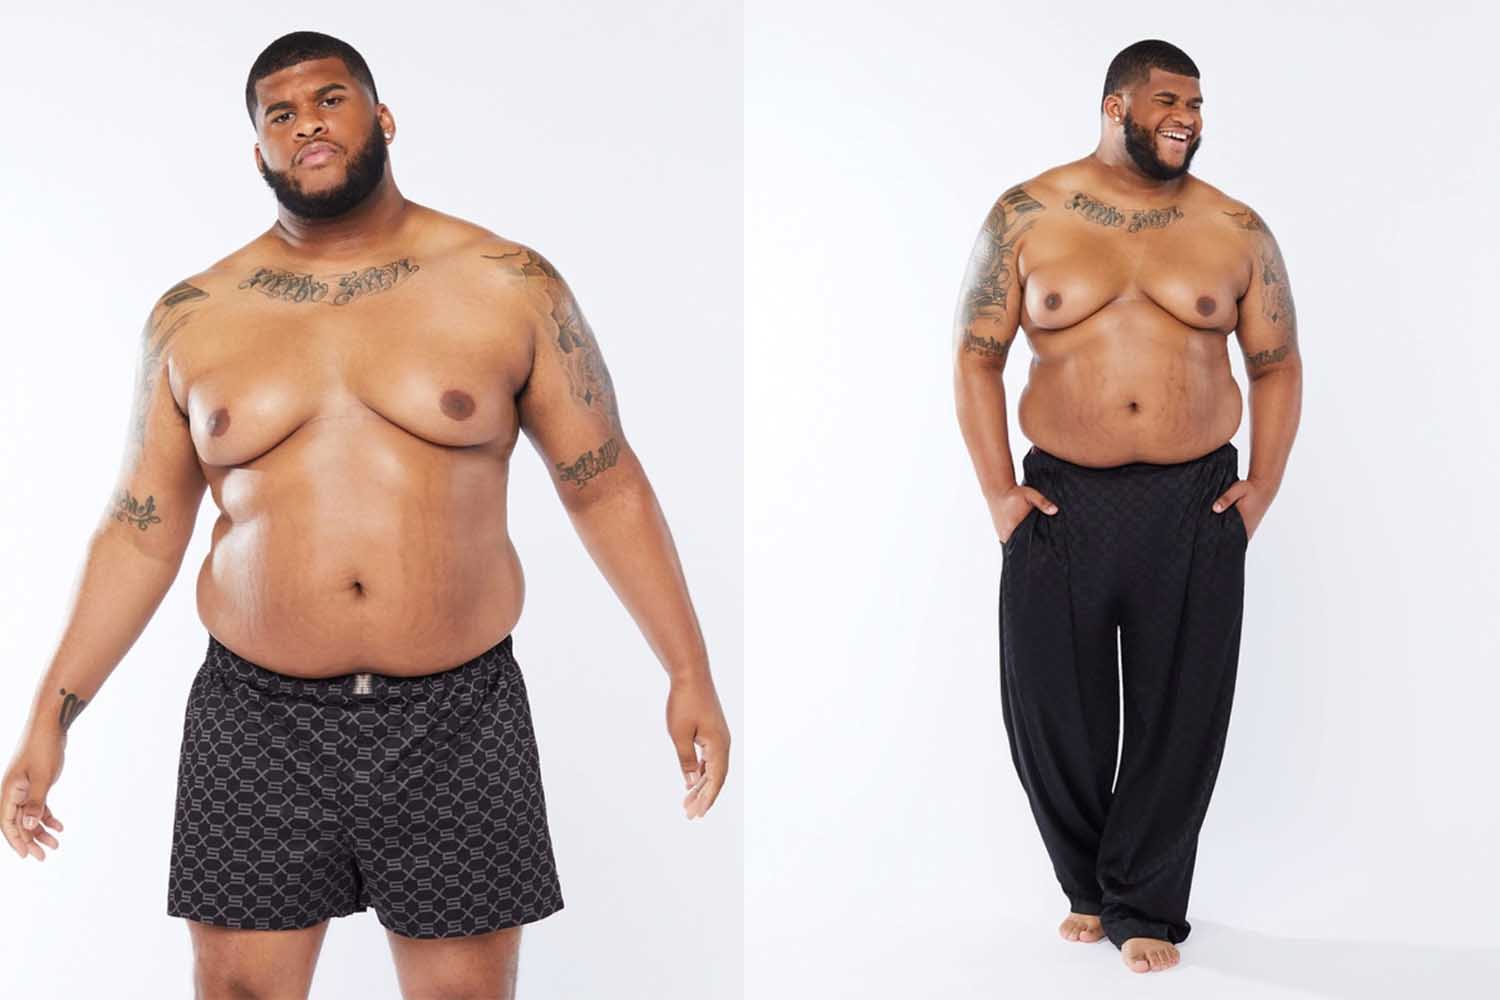 Rihanna’s Underwear Company Reminds the Internet That Big Men Are Sexy Too